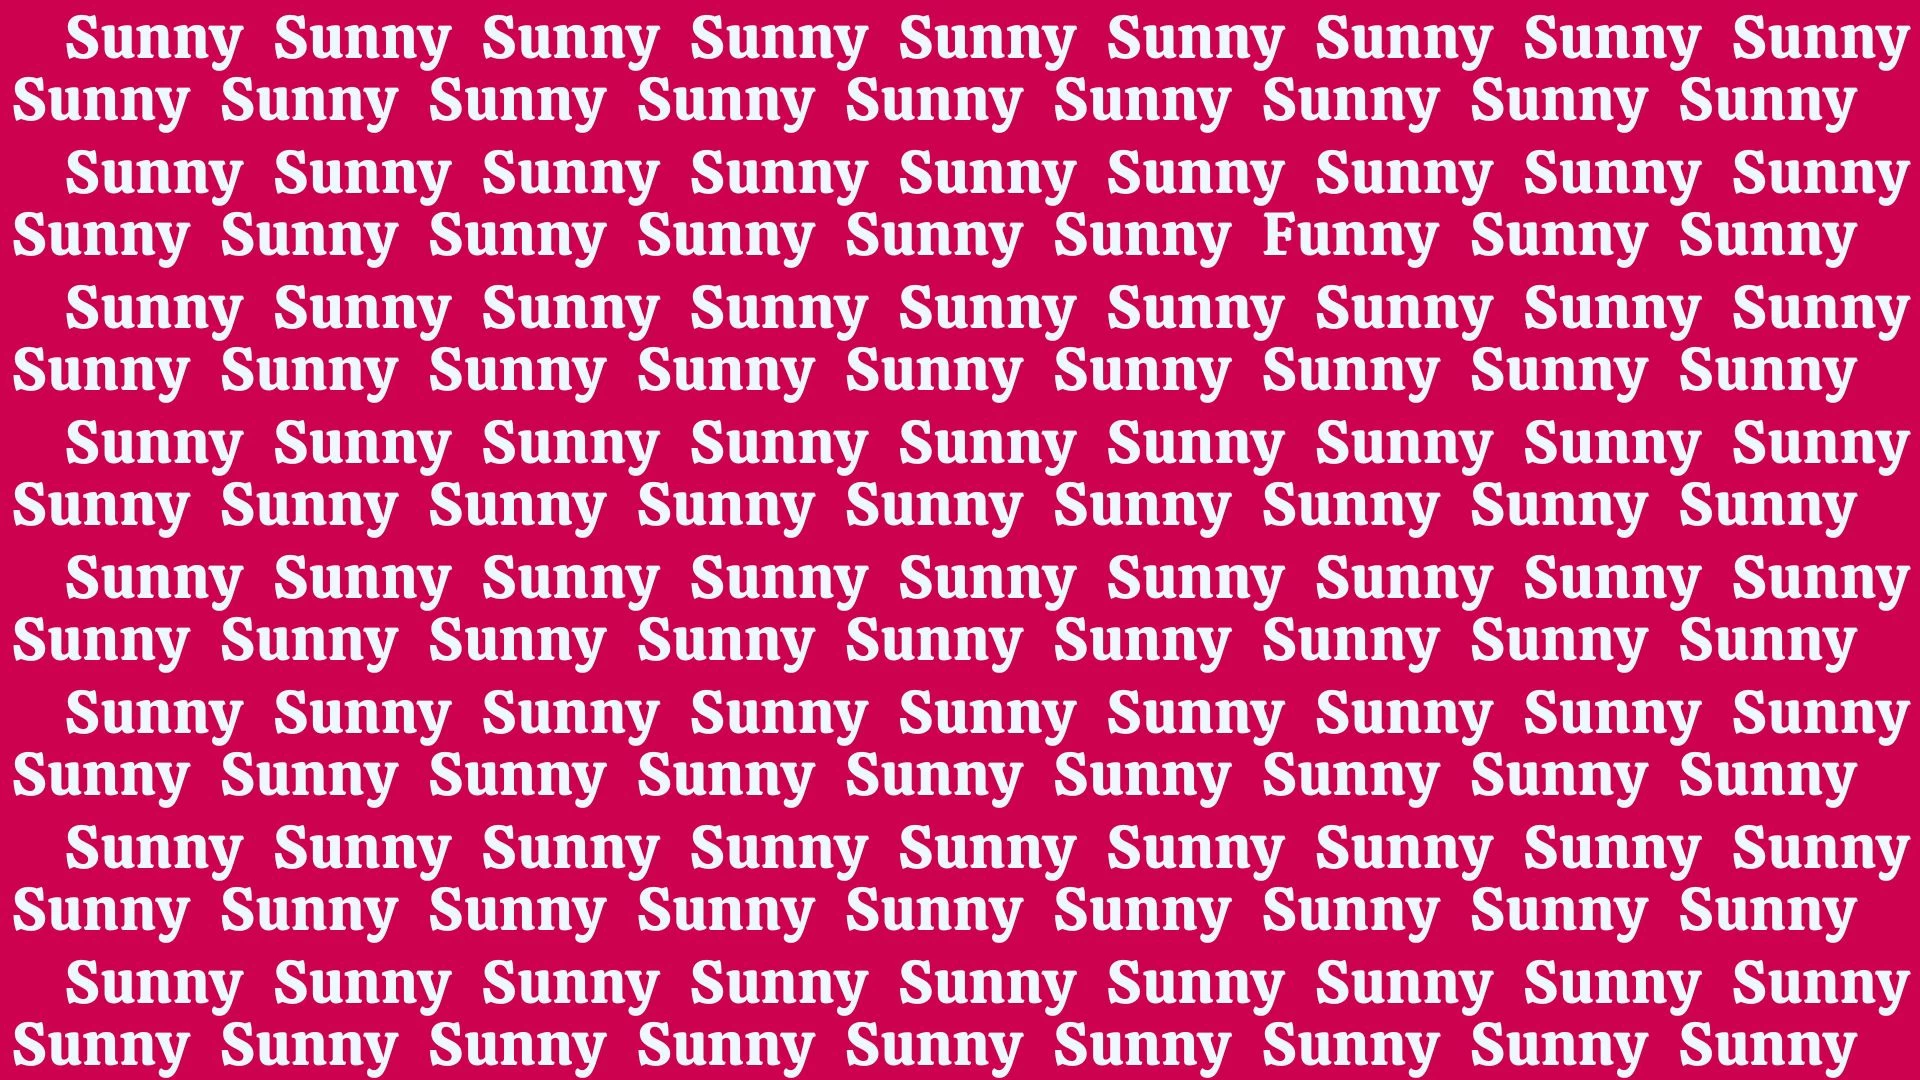 Only Extra Sharp Eyes Can Find the Word Funny among Sunny in 15 Secs